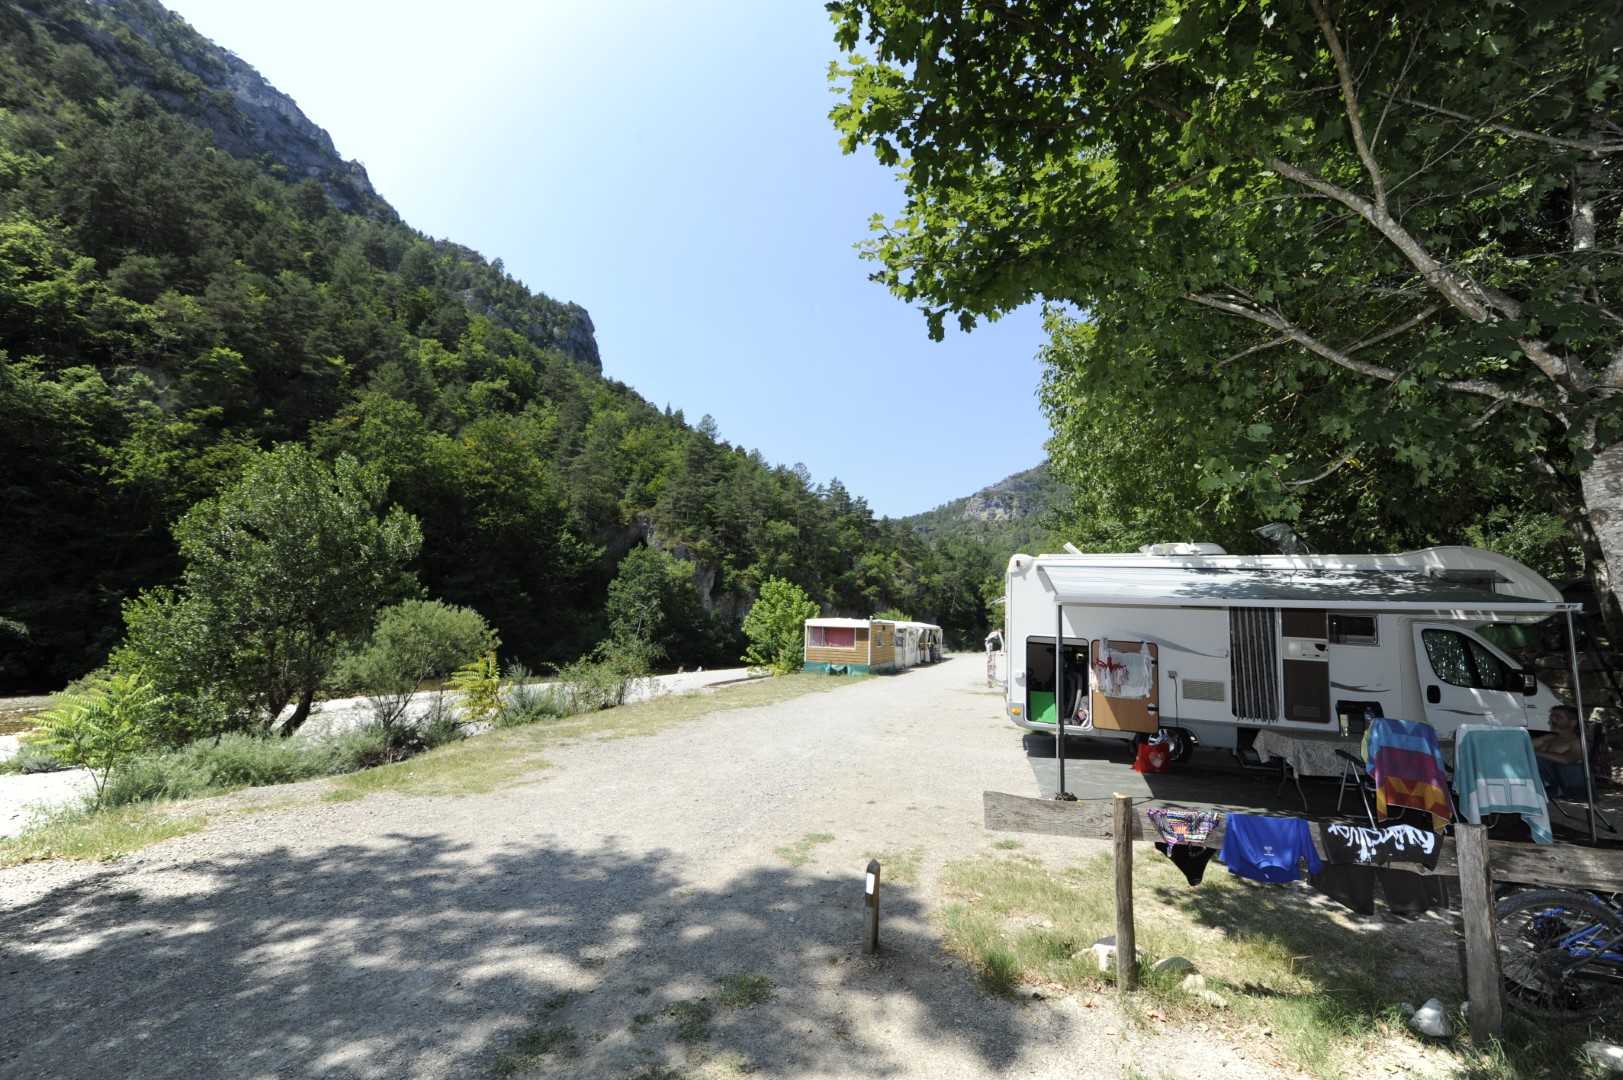 Pitches For Motorhomes On The Riverside